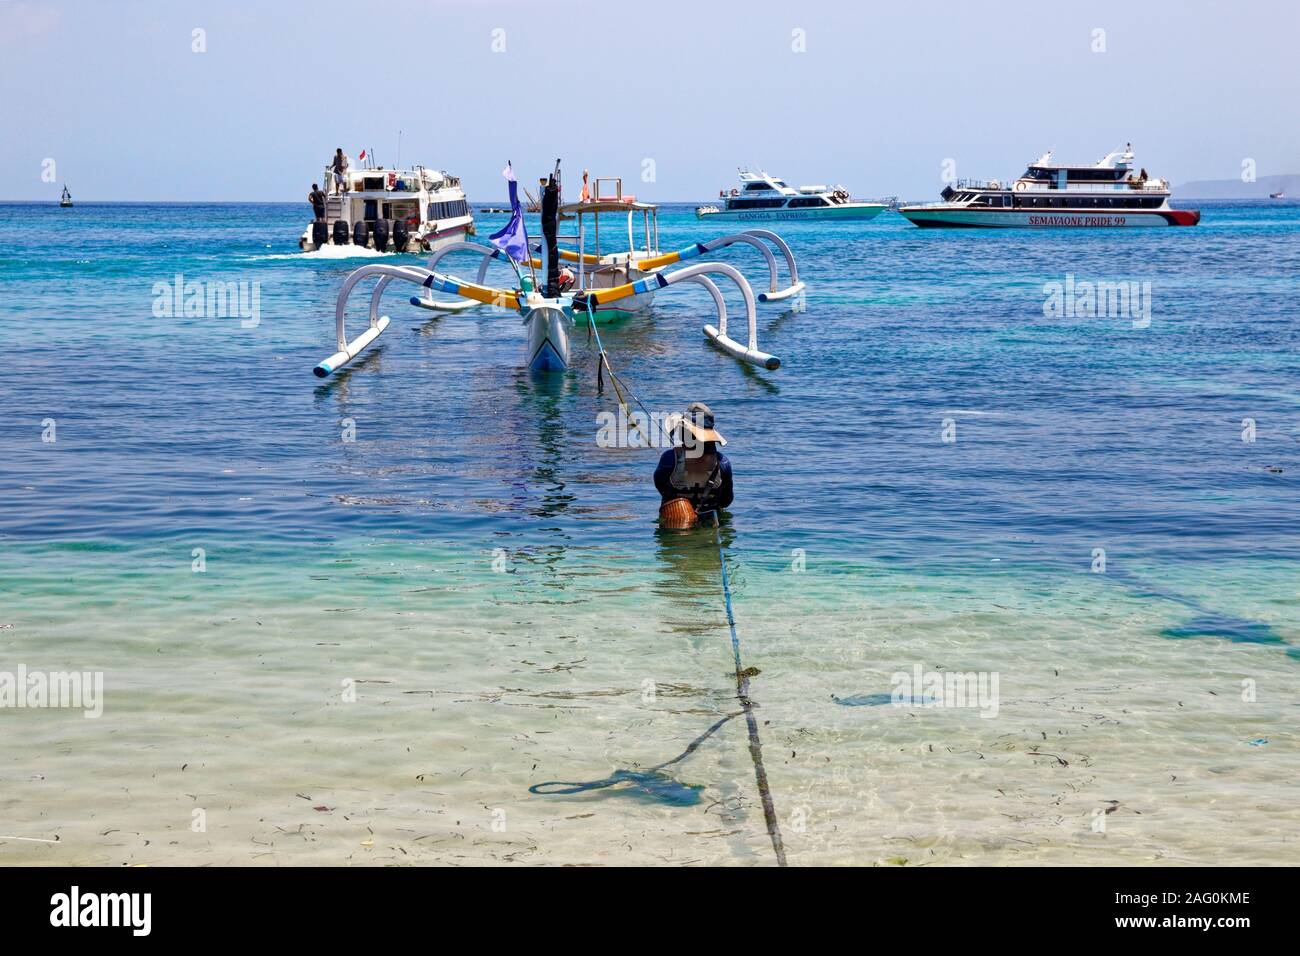 Usually working day of man in water anchoring wooden shell, standing in waters of Balinese sea Stock Photo